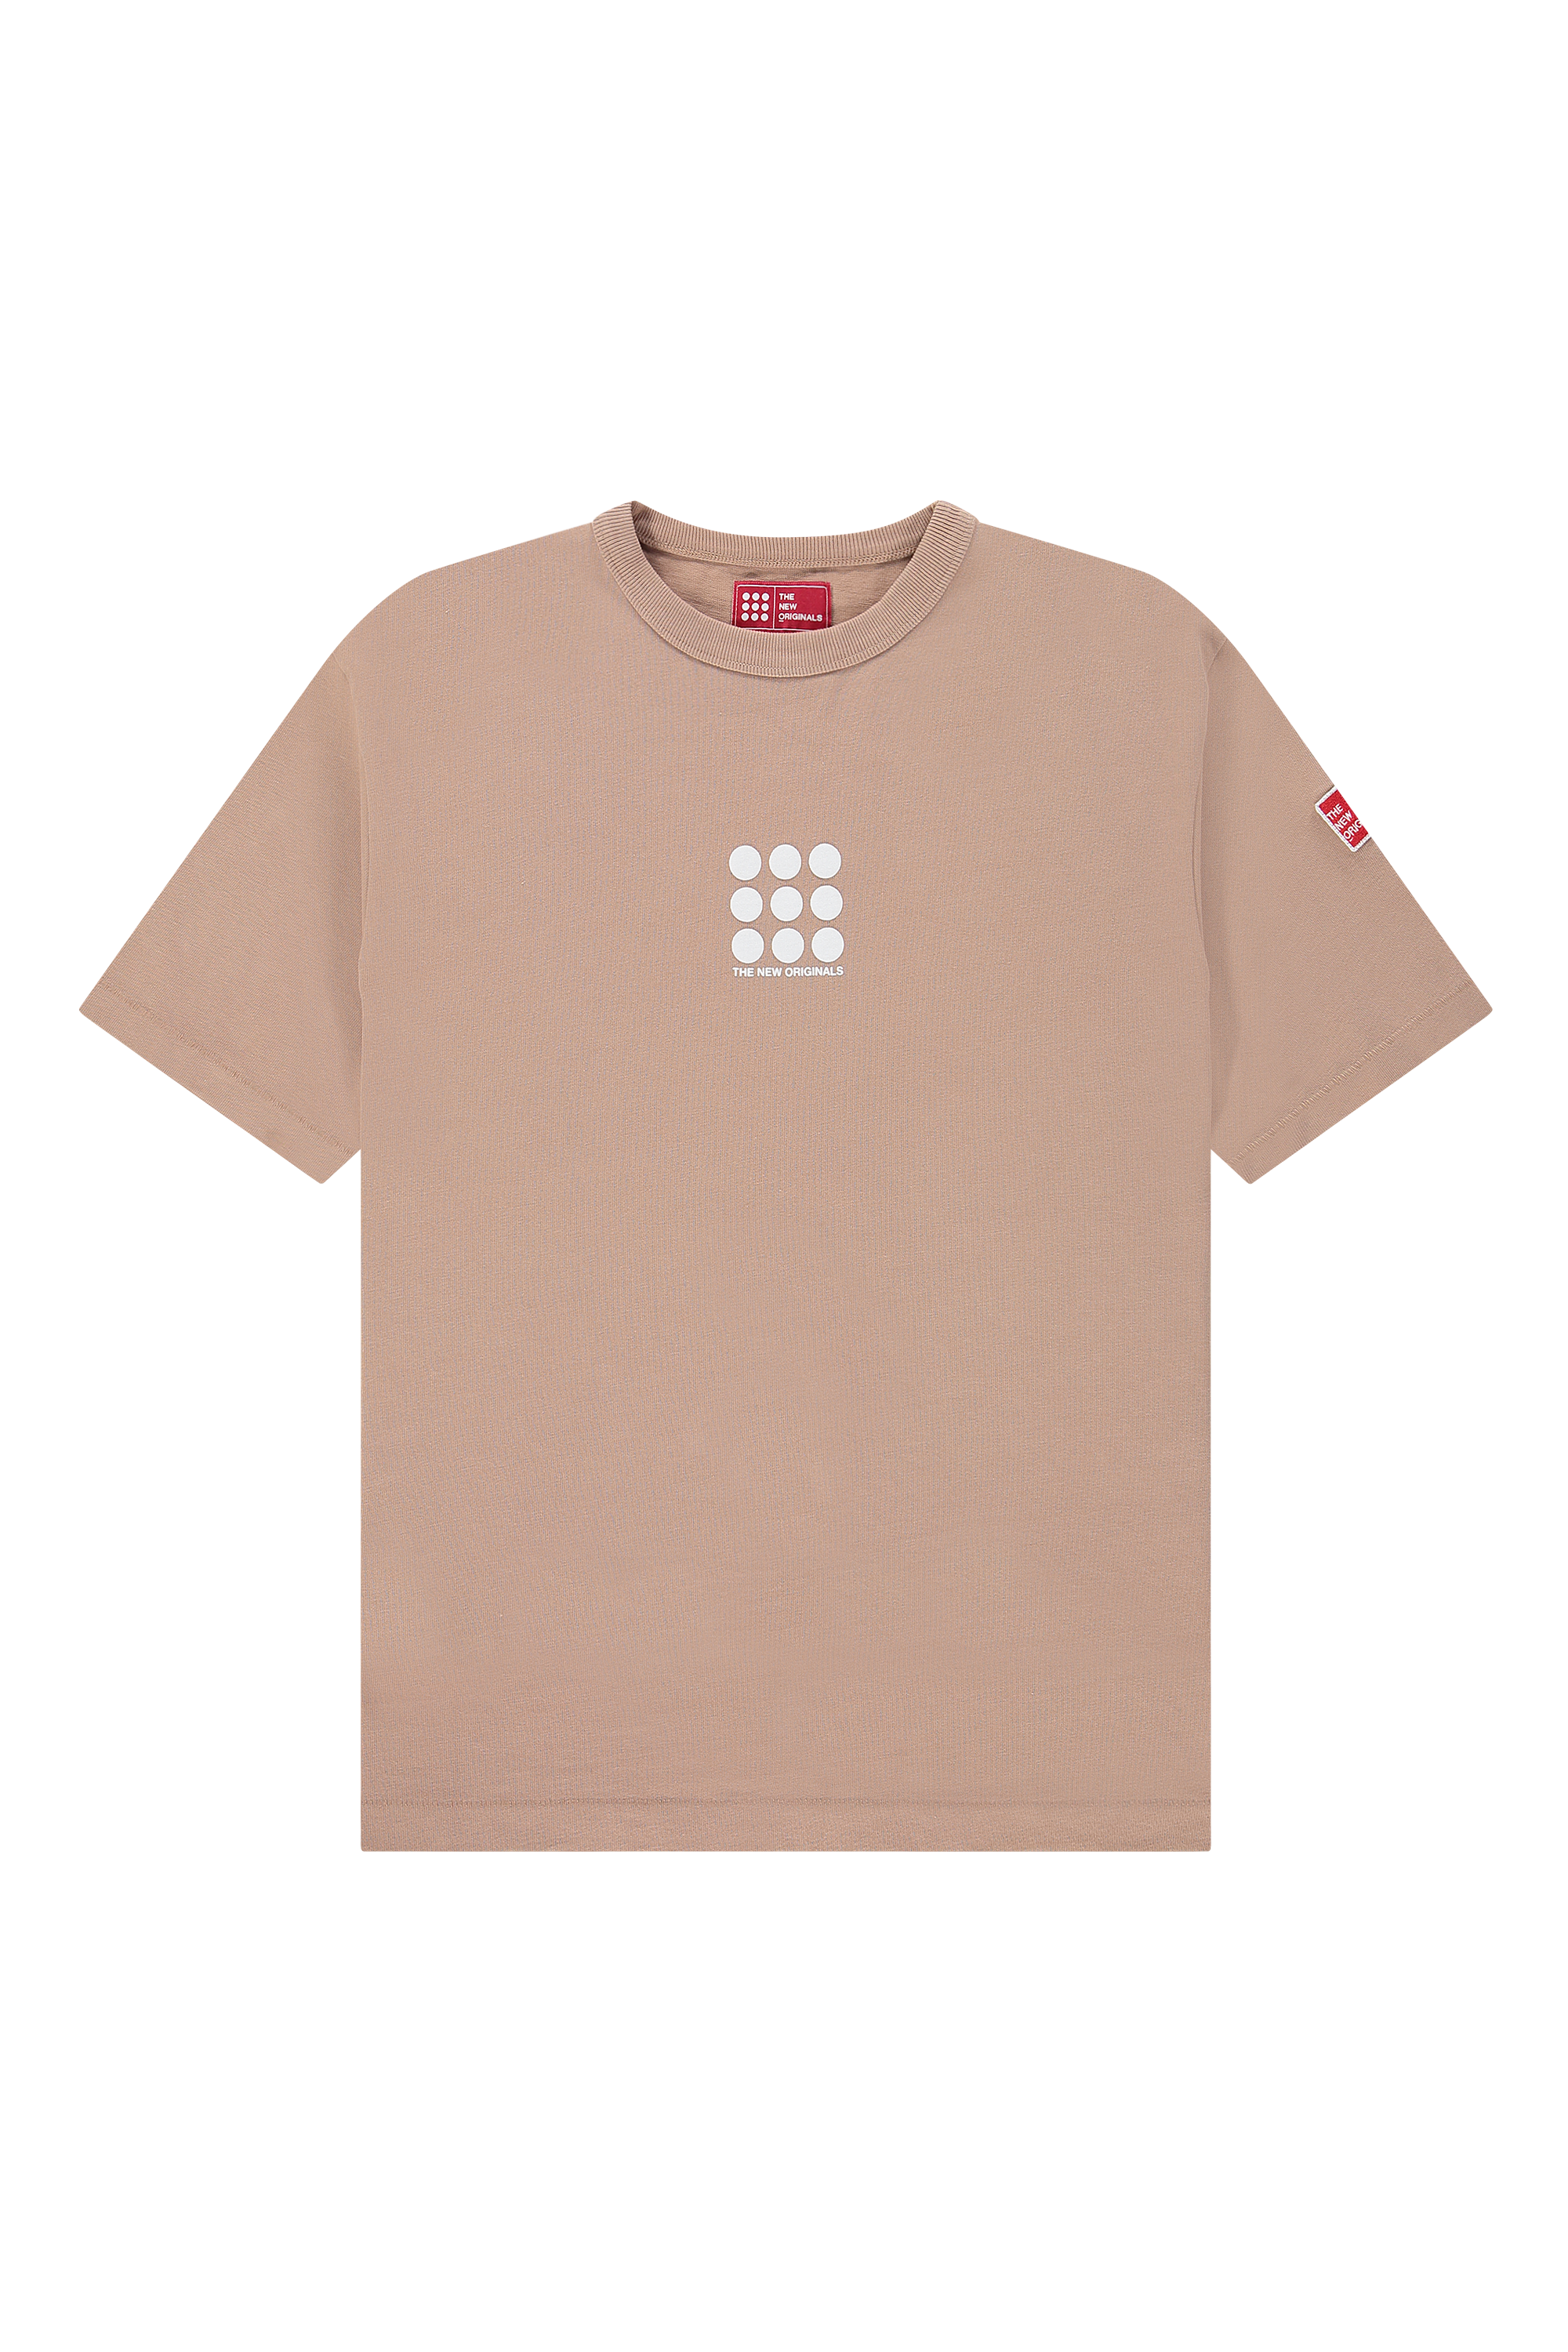 products-tshirt_lightbrown_front-png